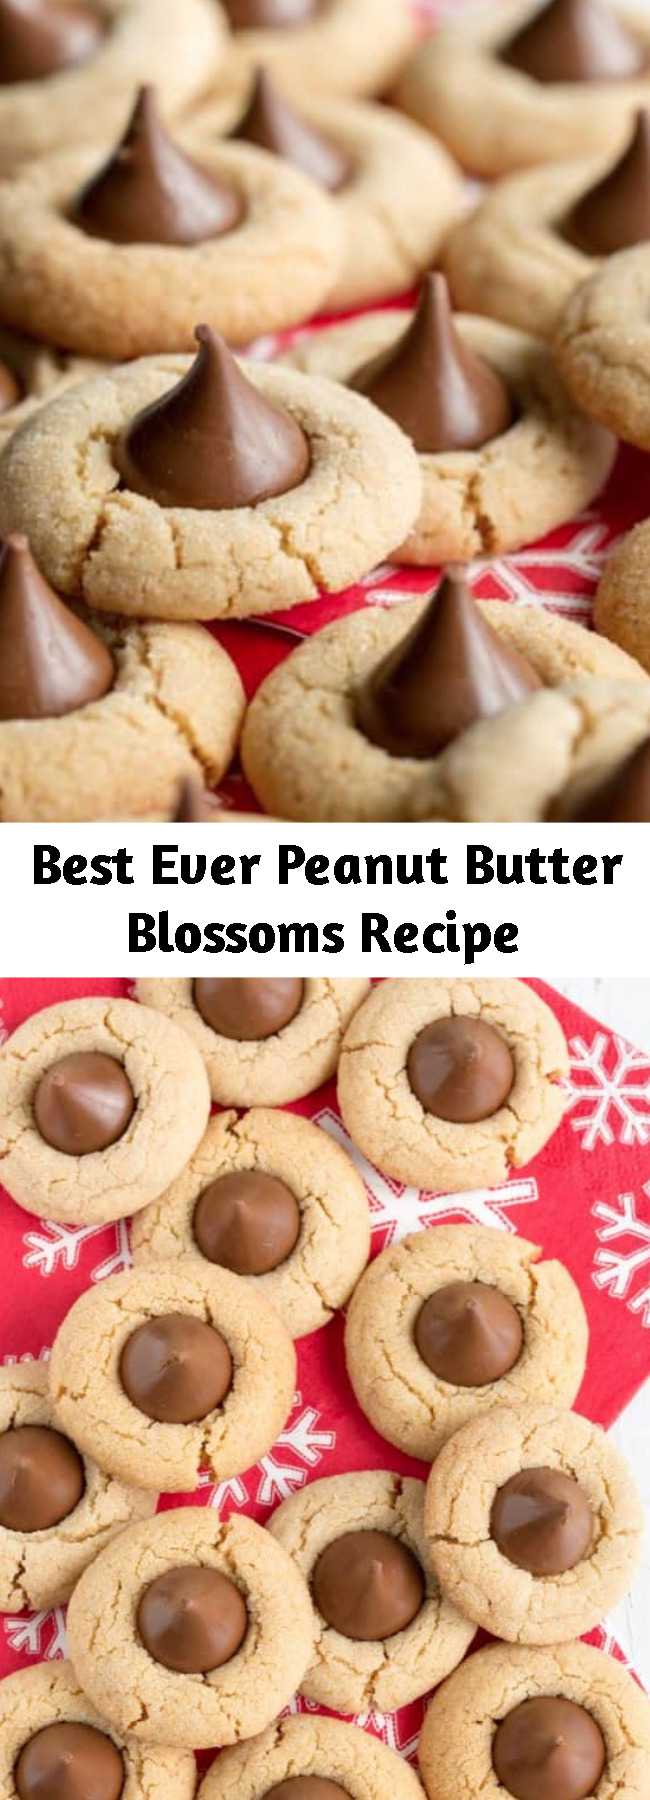 Best Ever Peanut Butter Blossoms Recipe - A crisp chewy peanut butter cookie topped with a milk chocolate kiss – a family favorite for generations! These Peanut Butter Blossom are absolutely scrumptious, and easy to make too.  What’s not to love about peanut butter and chocolate?! #peanutbutterblossoms #peanutbutterkisses #kissescookies #cookies #holidaycookies #peanutbutterchocolatekissescookies